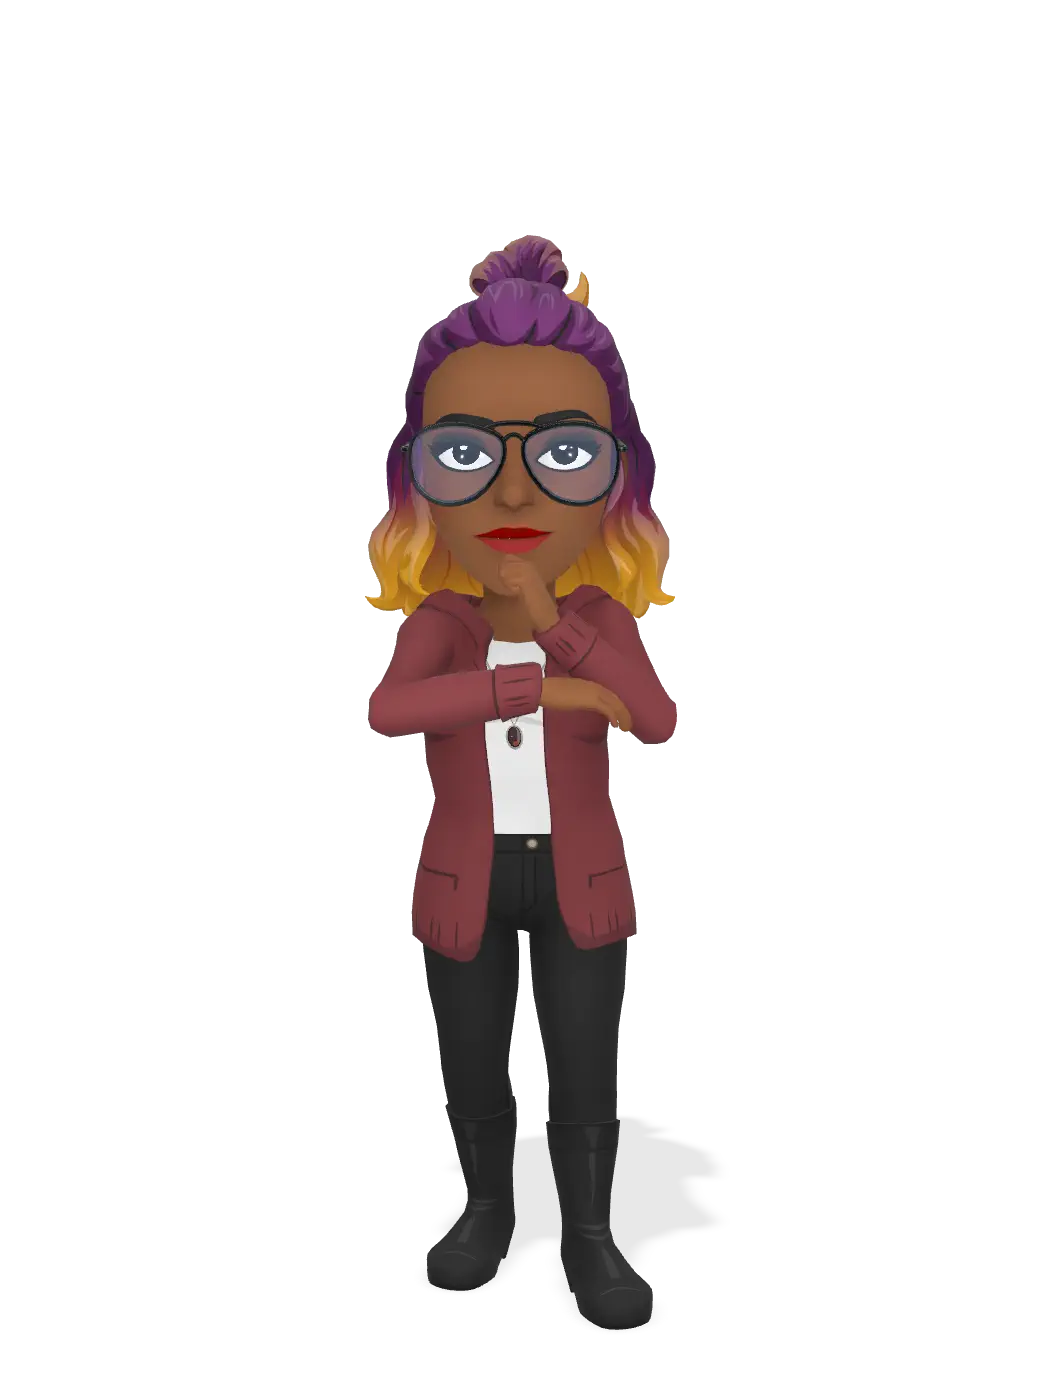 3D Bitmoji for ilayscollection